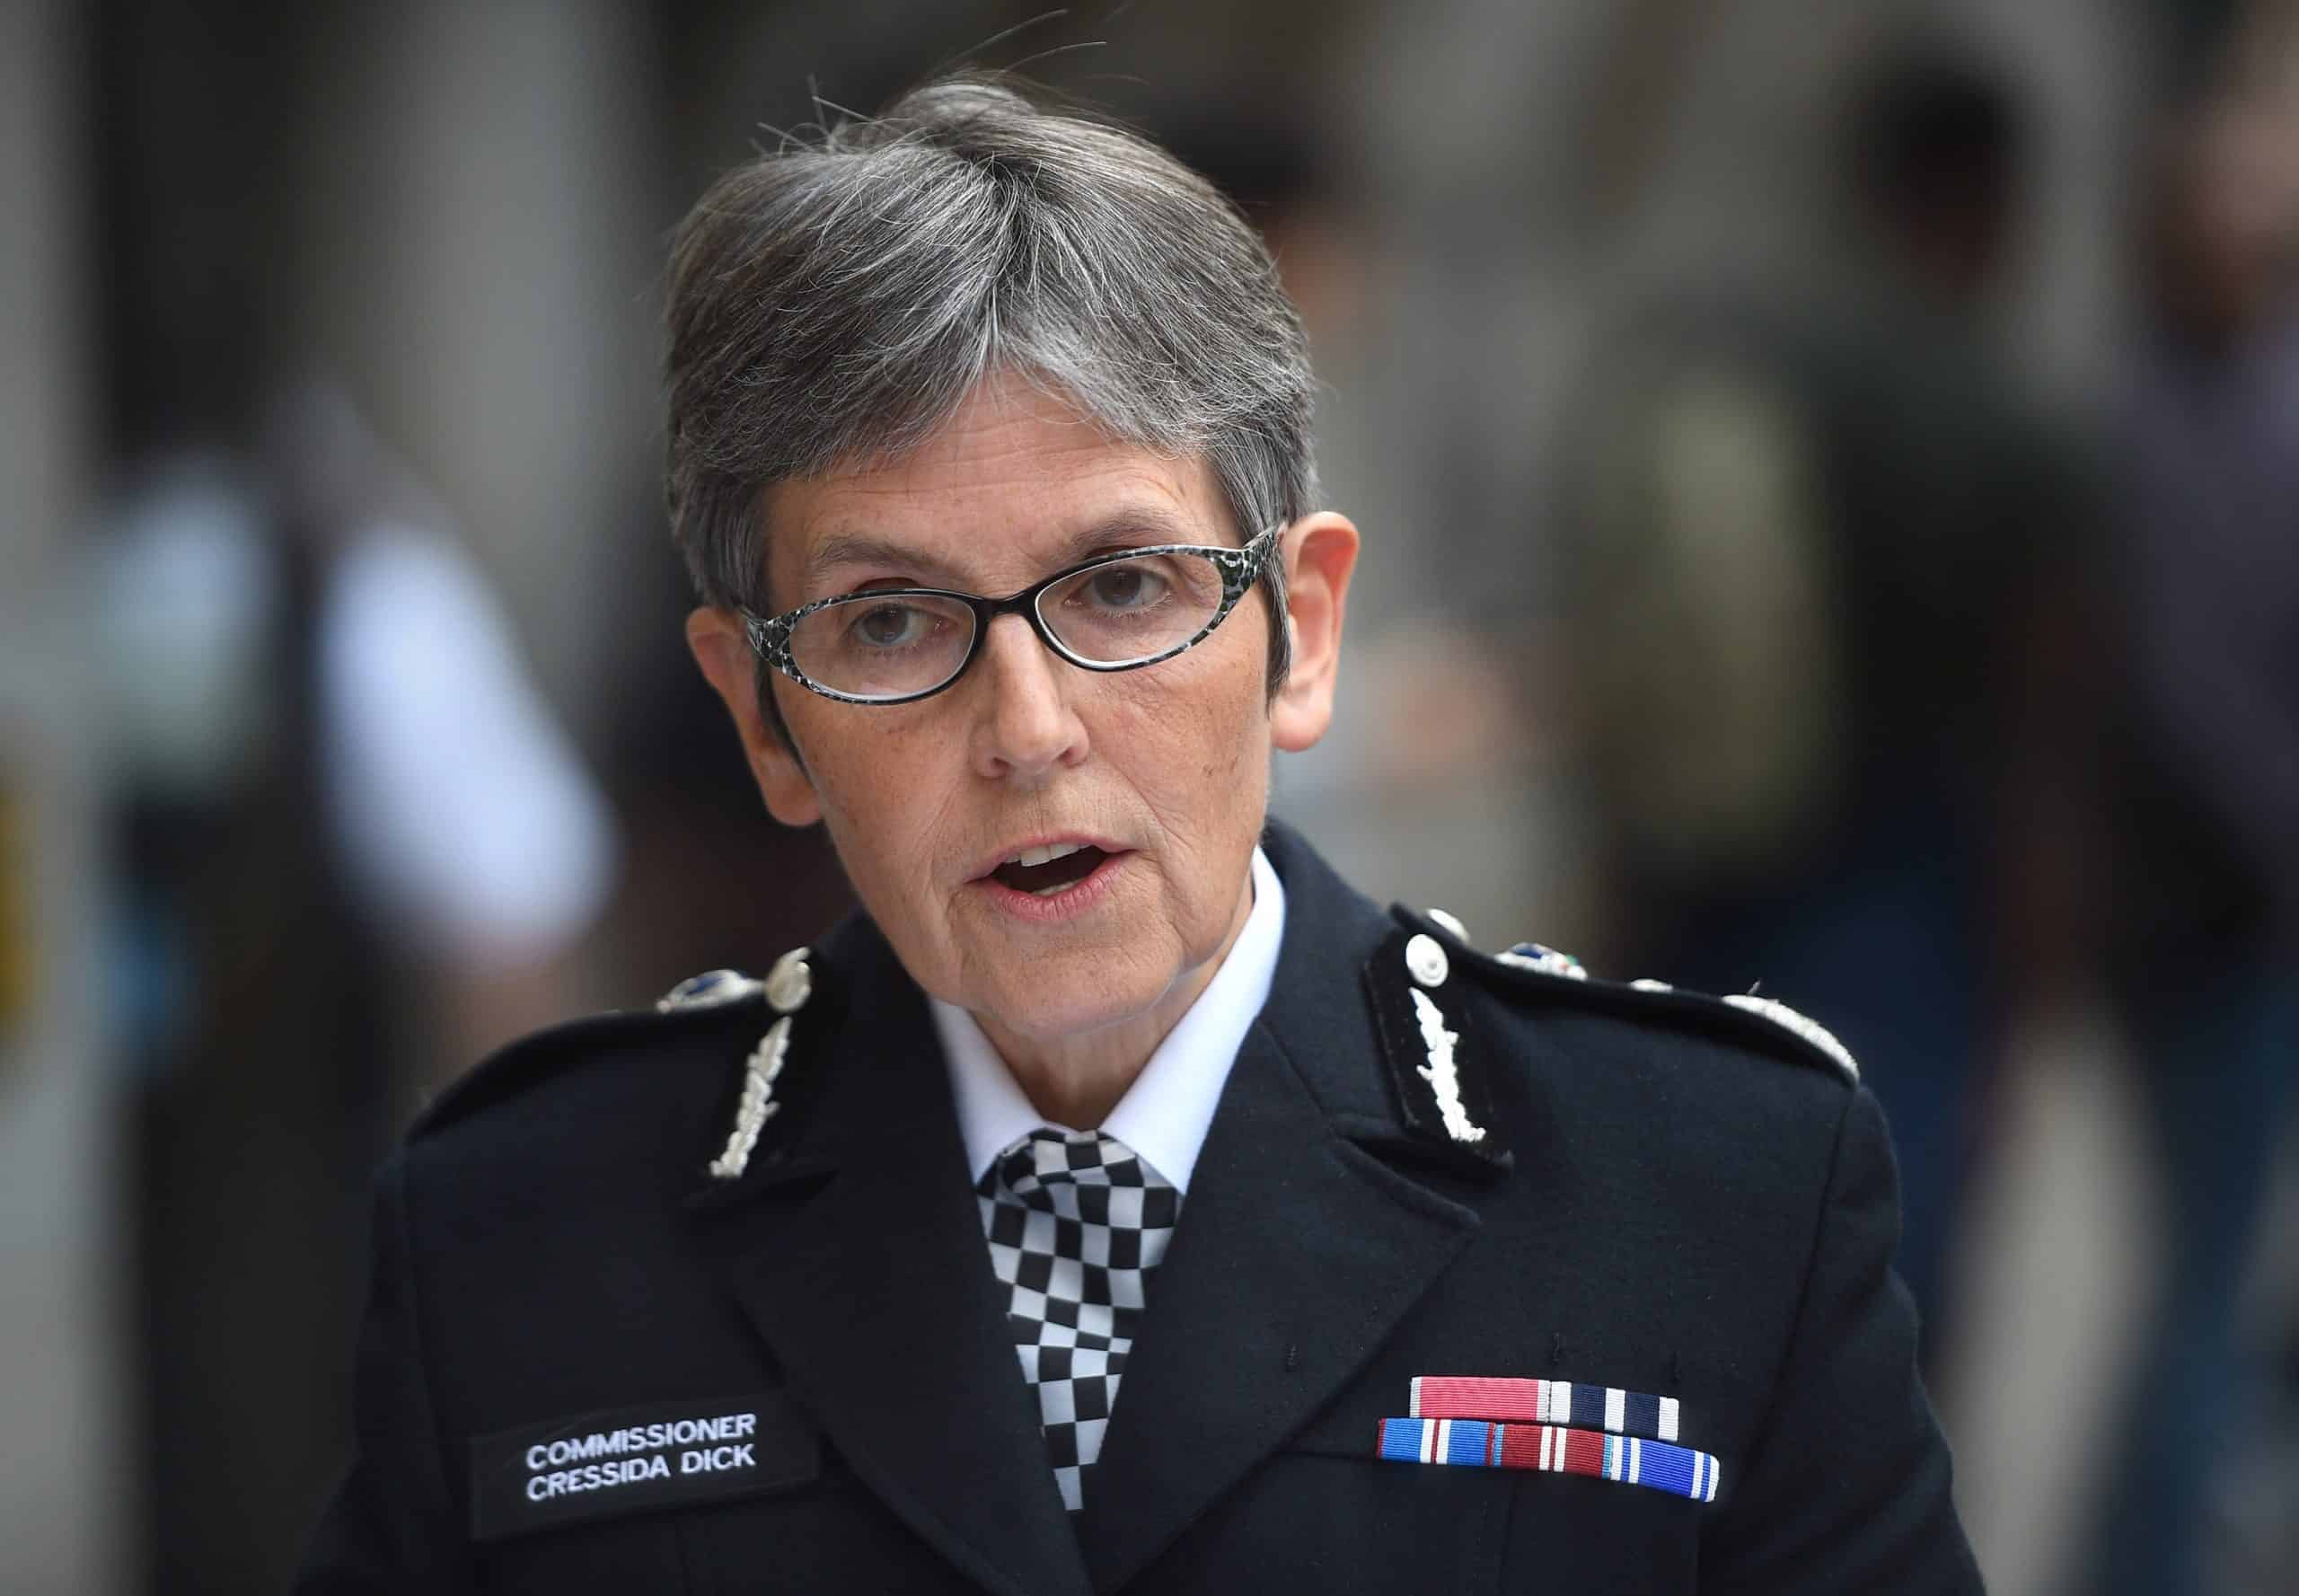 Met chief cleared by police watchdog over Operation Midland role